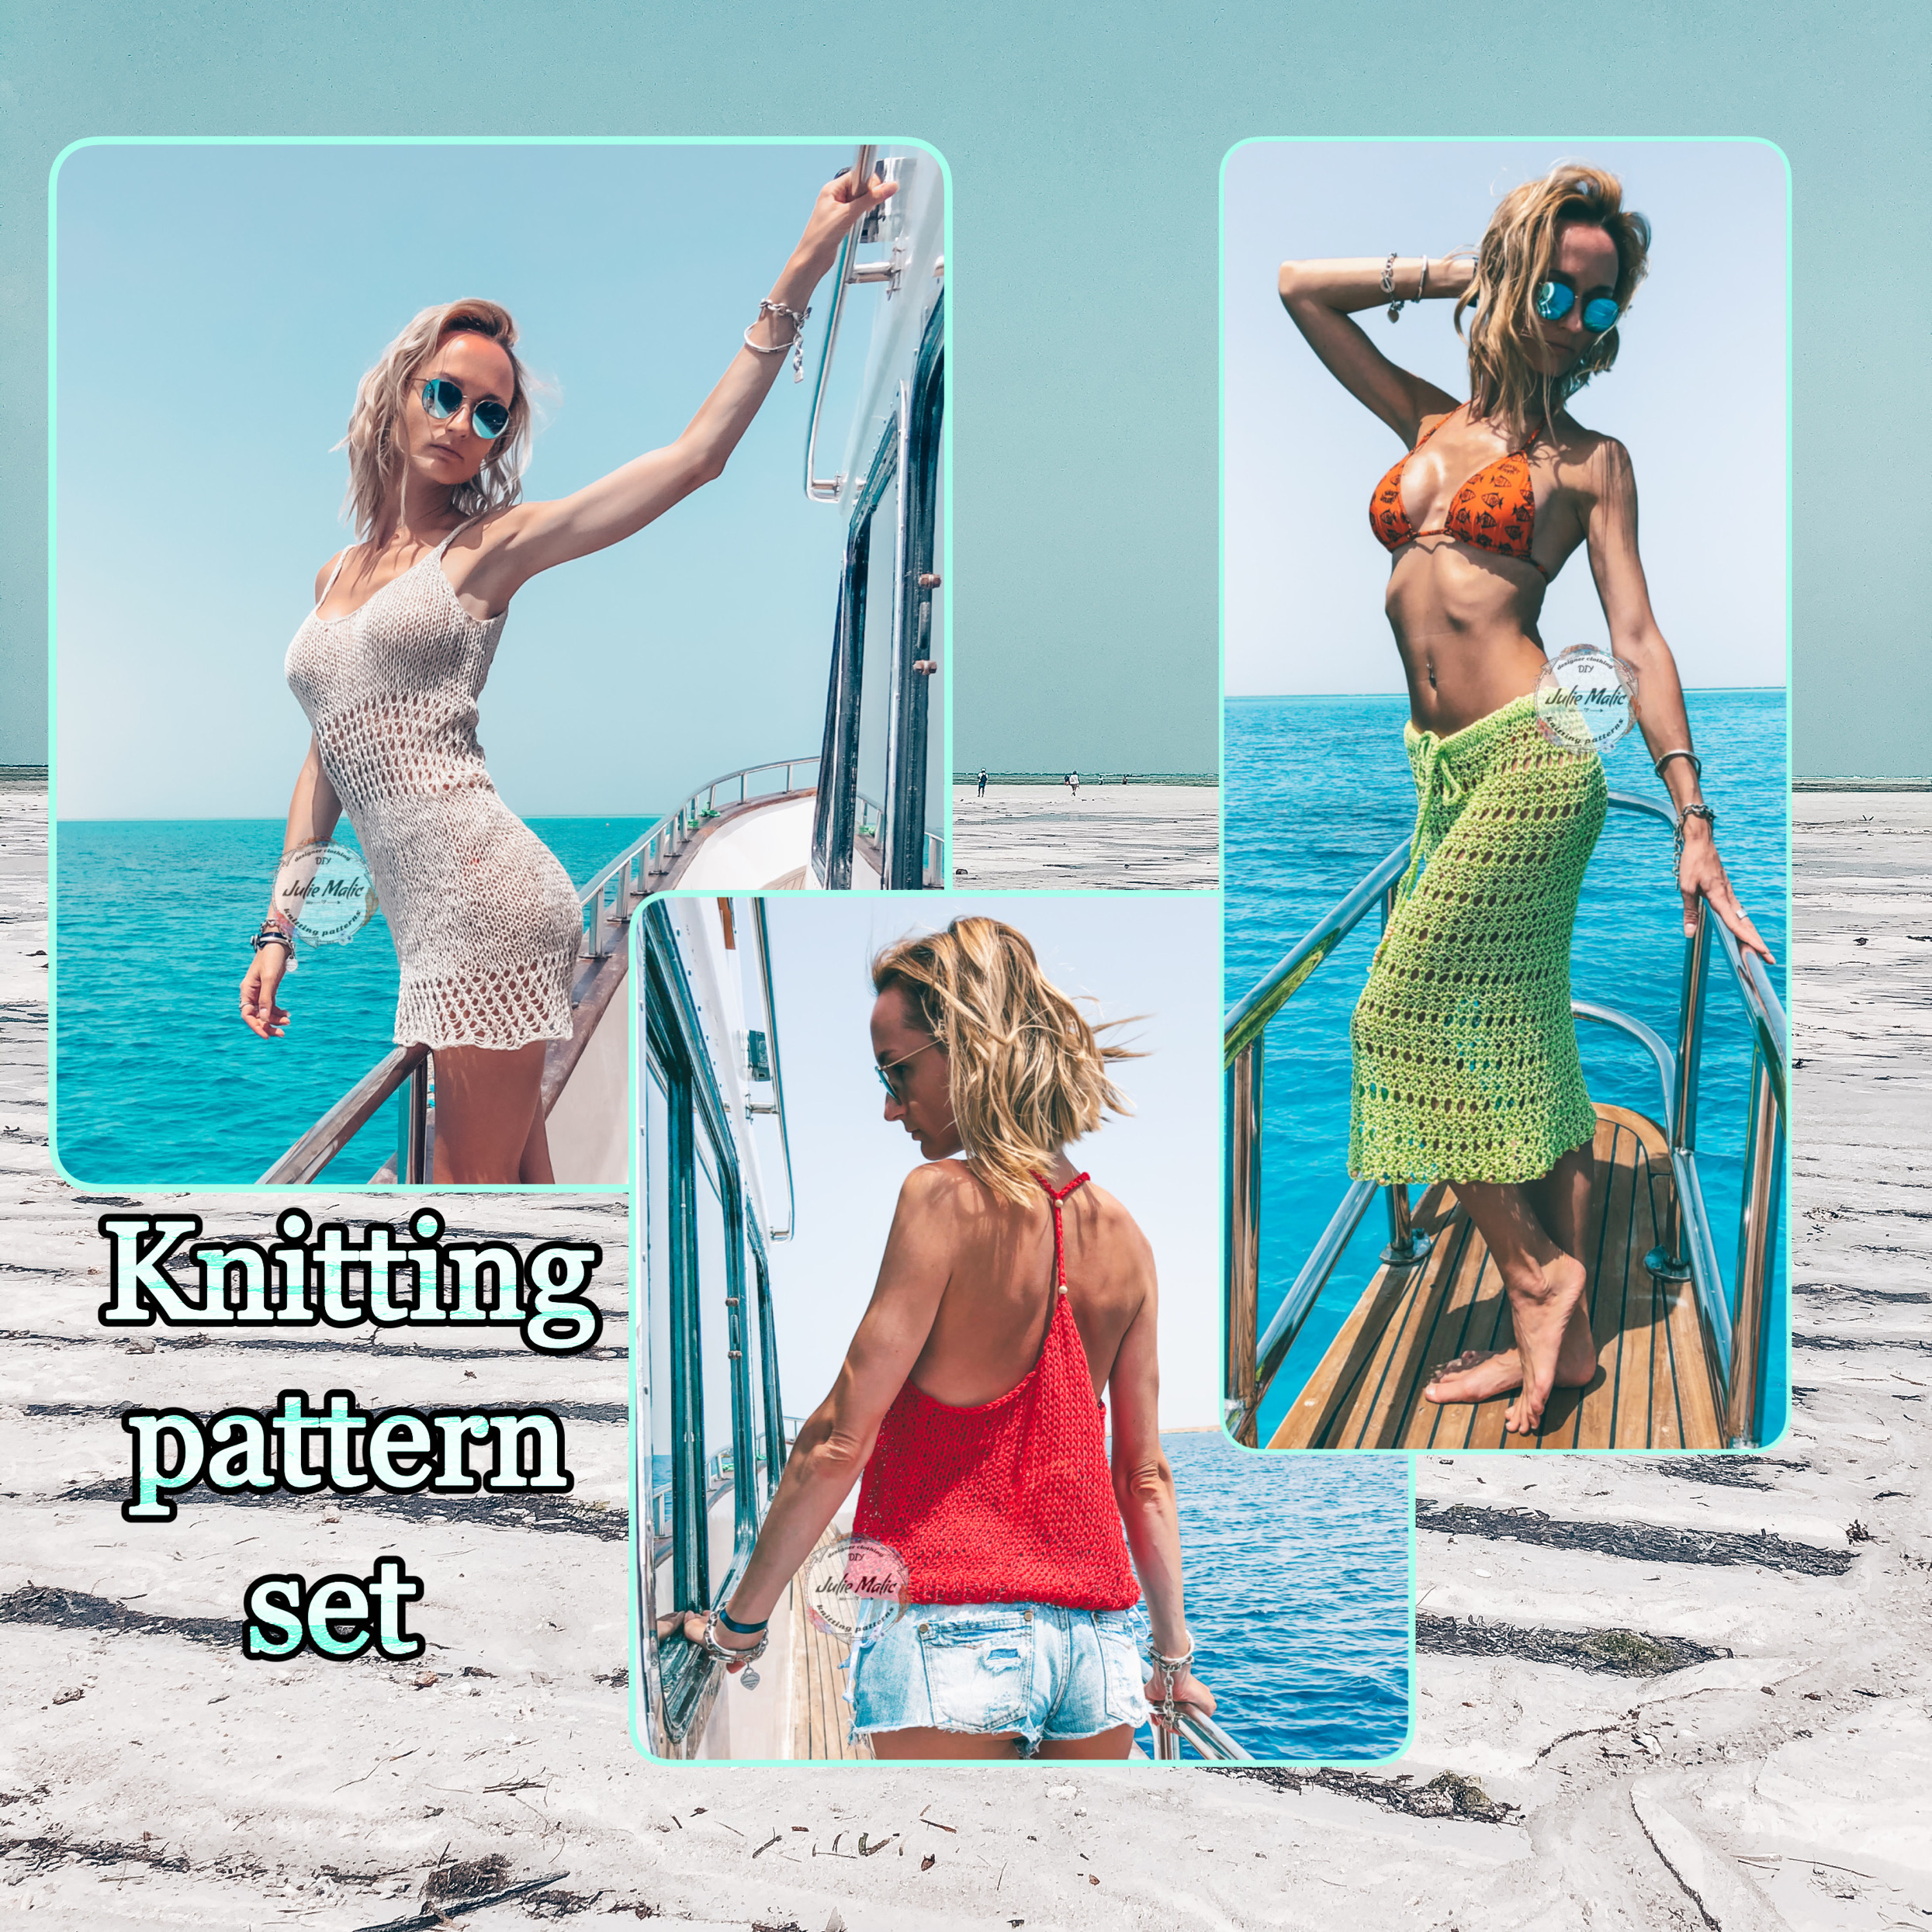 pattern set of 3 beachwear, set of patterns, knitting patterns sets, special offer, patterns for sale, knitting pattern, pdf knitting pattern, knit pattern, knitting tutorial, knitting instruction, step by step pattern, easy knitting pattern, knitting for beginners, beach top pattern, beach cover up pattern, sexy top knit pattern, sheer top pattern, hand knitting, knitting inspiration, diy knitting pattern, aesthetic clothing, beach cover up, beige sheer top, bikini top, bohemian clothing, bohemian gypsy top, bohemian white top, bohemian chic, boho clothing, boho crop top, cheeky bikini, cotton tunic women, country tank top, crochet top, cropped blouse, festival clothing women, festival outfit, fishnet top, beach long sleeve crop top, fishnet longsleeve, fishnet shirt, goa top, gypsy top, hand knit top, hand knitted top, hippie clothes women, hippie clothing, hippie shirt, knitted crop top, loose fit top, loose knit top, mesh crop top, minimalist top, organic cotton top, see through top, sexy festival top, sheer crop top, tie dye top, tribal clothing, tribal crop top, tribal gypsy top, white boho top, white sheer top, woven top, ombré sweater, summer pullover, summer sweater, hot sweater, summer outfit, sexy sheer clothing, colorful longsleeve, multicolored summer blouse, hand dyed top, beach outfit, resort clothing, vacation fashion, summer fashion clothing, knitted fashion, beige beach top, turquoise longsleeve, brown sheer top, nude top women, purple top, orange top, bright top, tank top knitting pattern, women's top pattern, summer tank top, knit pattern, easy knitting pattern, knitting tutorial, knitting instruction, pdf pattern for beginners, pdf pattern for instant download, sheer top pattern, sexy beach tops, knitted clothing, bohemian clothing, hand knitted top, hand knitting for beginners, see through tank top, boho knit tank top, beach cover up, handmade clothing, fishnet top, mesh tank top, summer outfit ideas, beach outfit, how to knit, basic top pattern, loose knit tank tops pattern, chunky knit clothing, knitting inspiration, diy knitting tutorial, step by step pattern, 21th birthday gift for her, halter top, bohemian gypsy top, boho clothing, boho crop top, country tank top, crochet tank top, festival outfit, halter neck top, hand knitted, hand knit tank top, knitted tank top, lace halter top, mesh crop top, minimalist top, open back top, off shoulder top, blue summer top, organic tank top, semi sheer top, sexy top, sheer crop top, tribal clothing, woven top, women knitted top, cotton tank top, wide straps with buttons, handmade tank top, linen tank top, natural linen clothing, loose fit top, linen tunic, linen shirt women, straps with rivets, beige sheer top, knit minimalist top, Hand knitted tops, wide straps mesh top, Womens sexy tank top, Women semi sheer top, tank dress knitting pattern, sheer dresses pattern, summer dress knit pattern, women's tunic easy knitting pattern, boho mini dress knitting tutorial, mesh dress knitting instruction, see through dress pdf pattern for beginners, pdf pattern for instant download, sexy dress pattern, beach cover up, knitted clothing, bohemian clothing, hand knitted tunics, hand knitting for beginners, boho knit tank dress, handmade clothing, fishnet dress, summer outfit ideas, beach outfit, how to knit, beach transparent dress pattern, loose knit dress pattern, chunky knit clothing, knitting inspiration, diy knitting tutorial, step by step pattern, 21th birthday gift for her, halter dress, bohemian gypsy dress, boho clothing, boho mini dress, country outfit, festival outfit, halter neck dress, hand knitted, hand knit sexy dress, knitted summer tunics, lace dress, open back dress, off shoulder dress, white summer dress, organic cotton dress, semi sheer clothes, tribal clothing, asymmetrical tunic